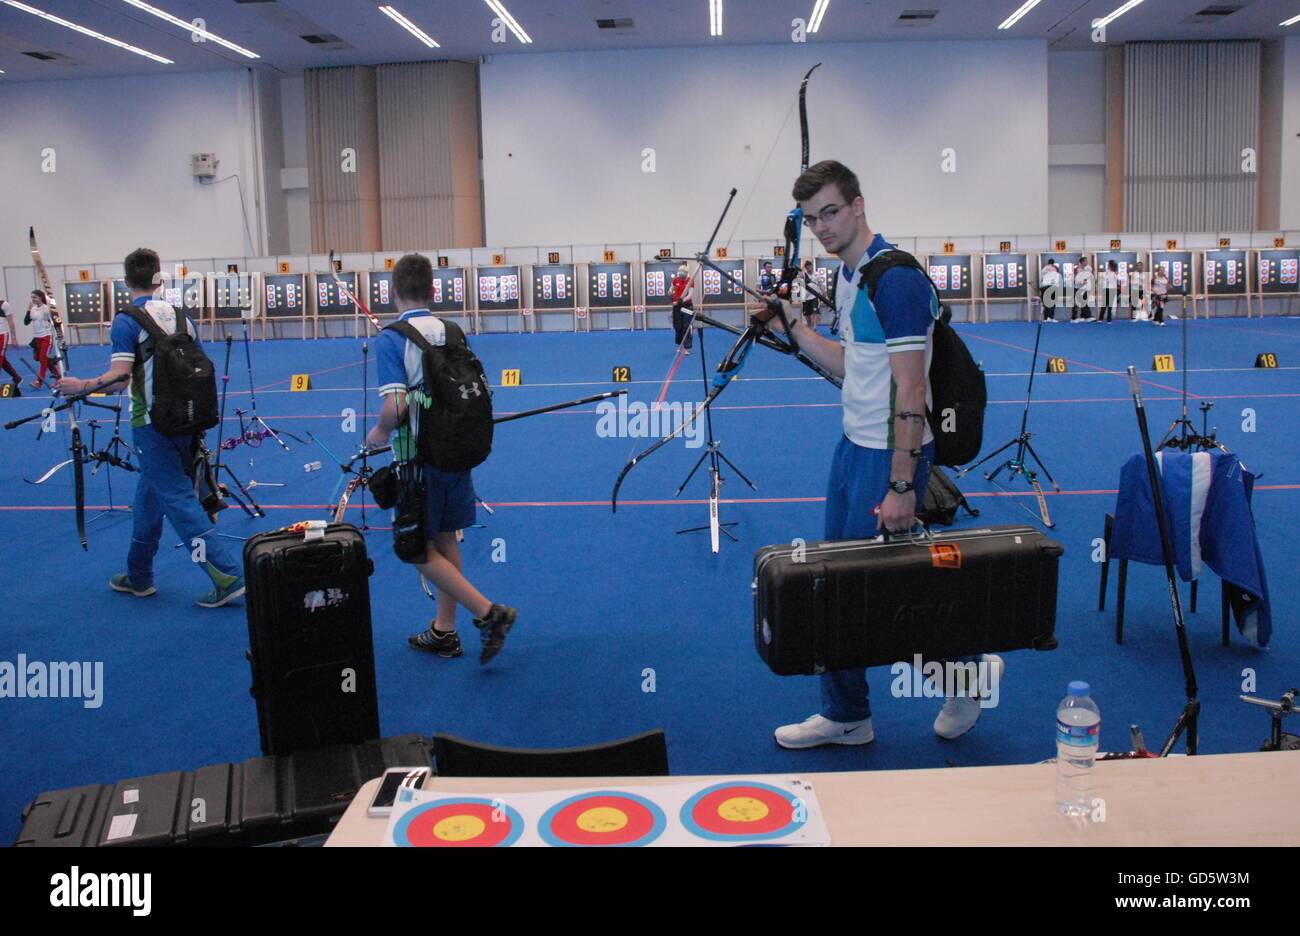 The last indoor event of the 2015-16 winter season '2016 World Archery Indoor Championships' at the ATO Congresium Hall. Stock Photo